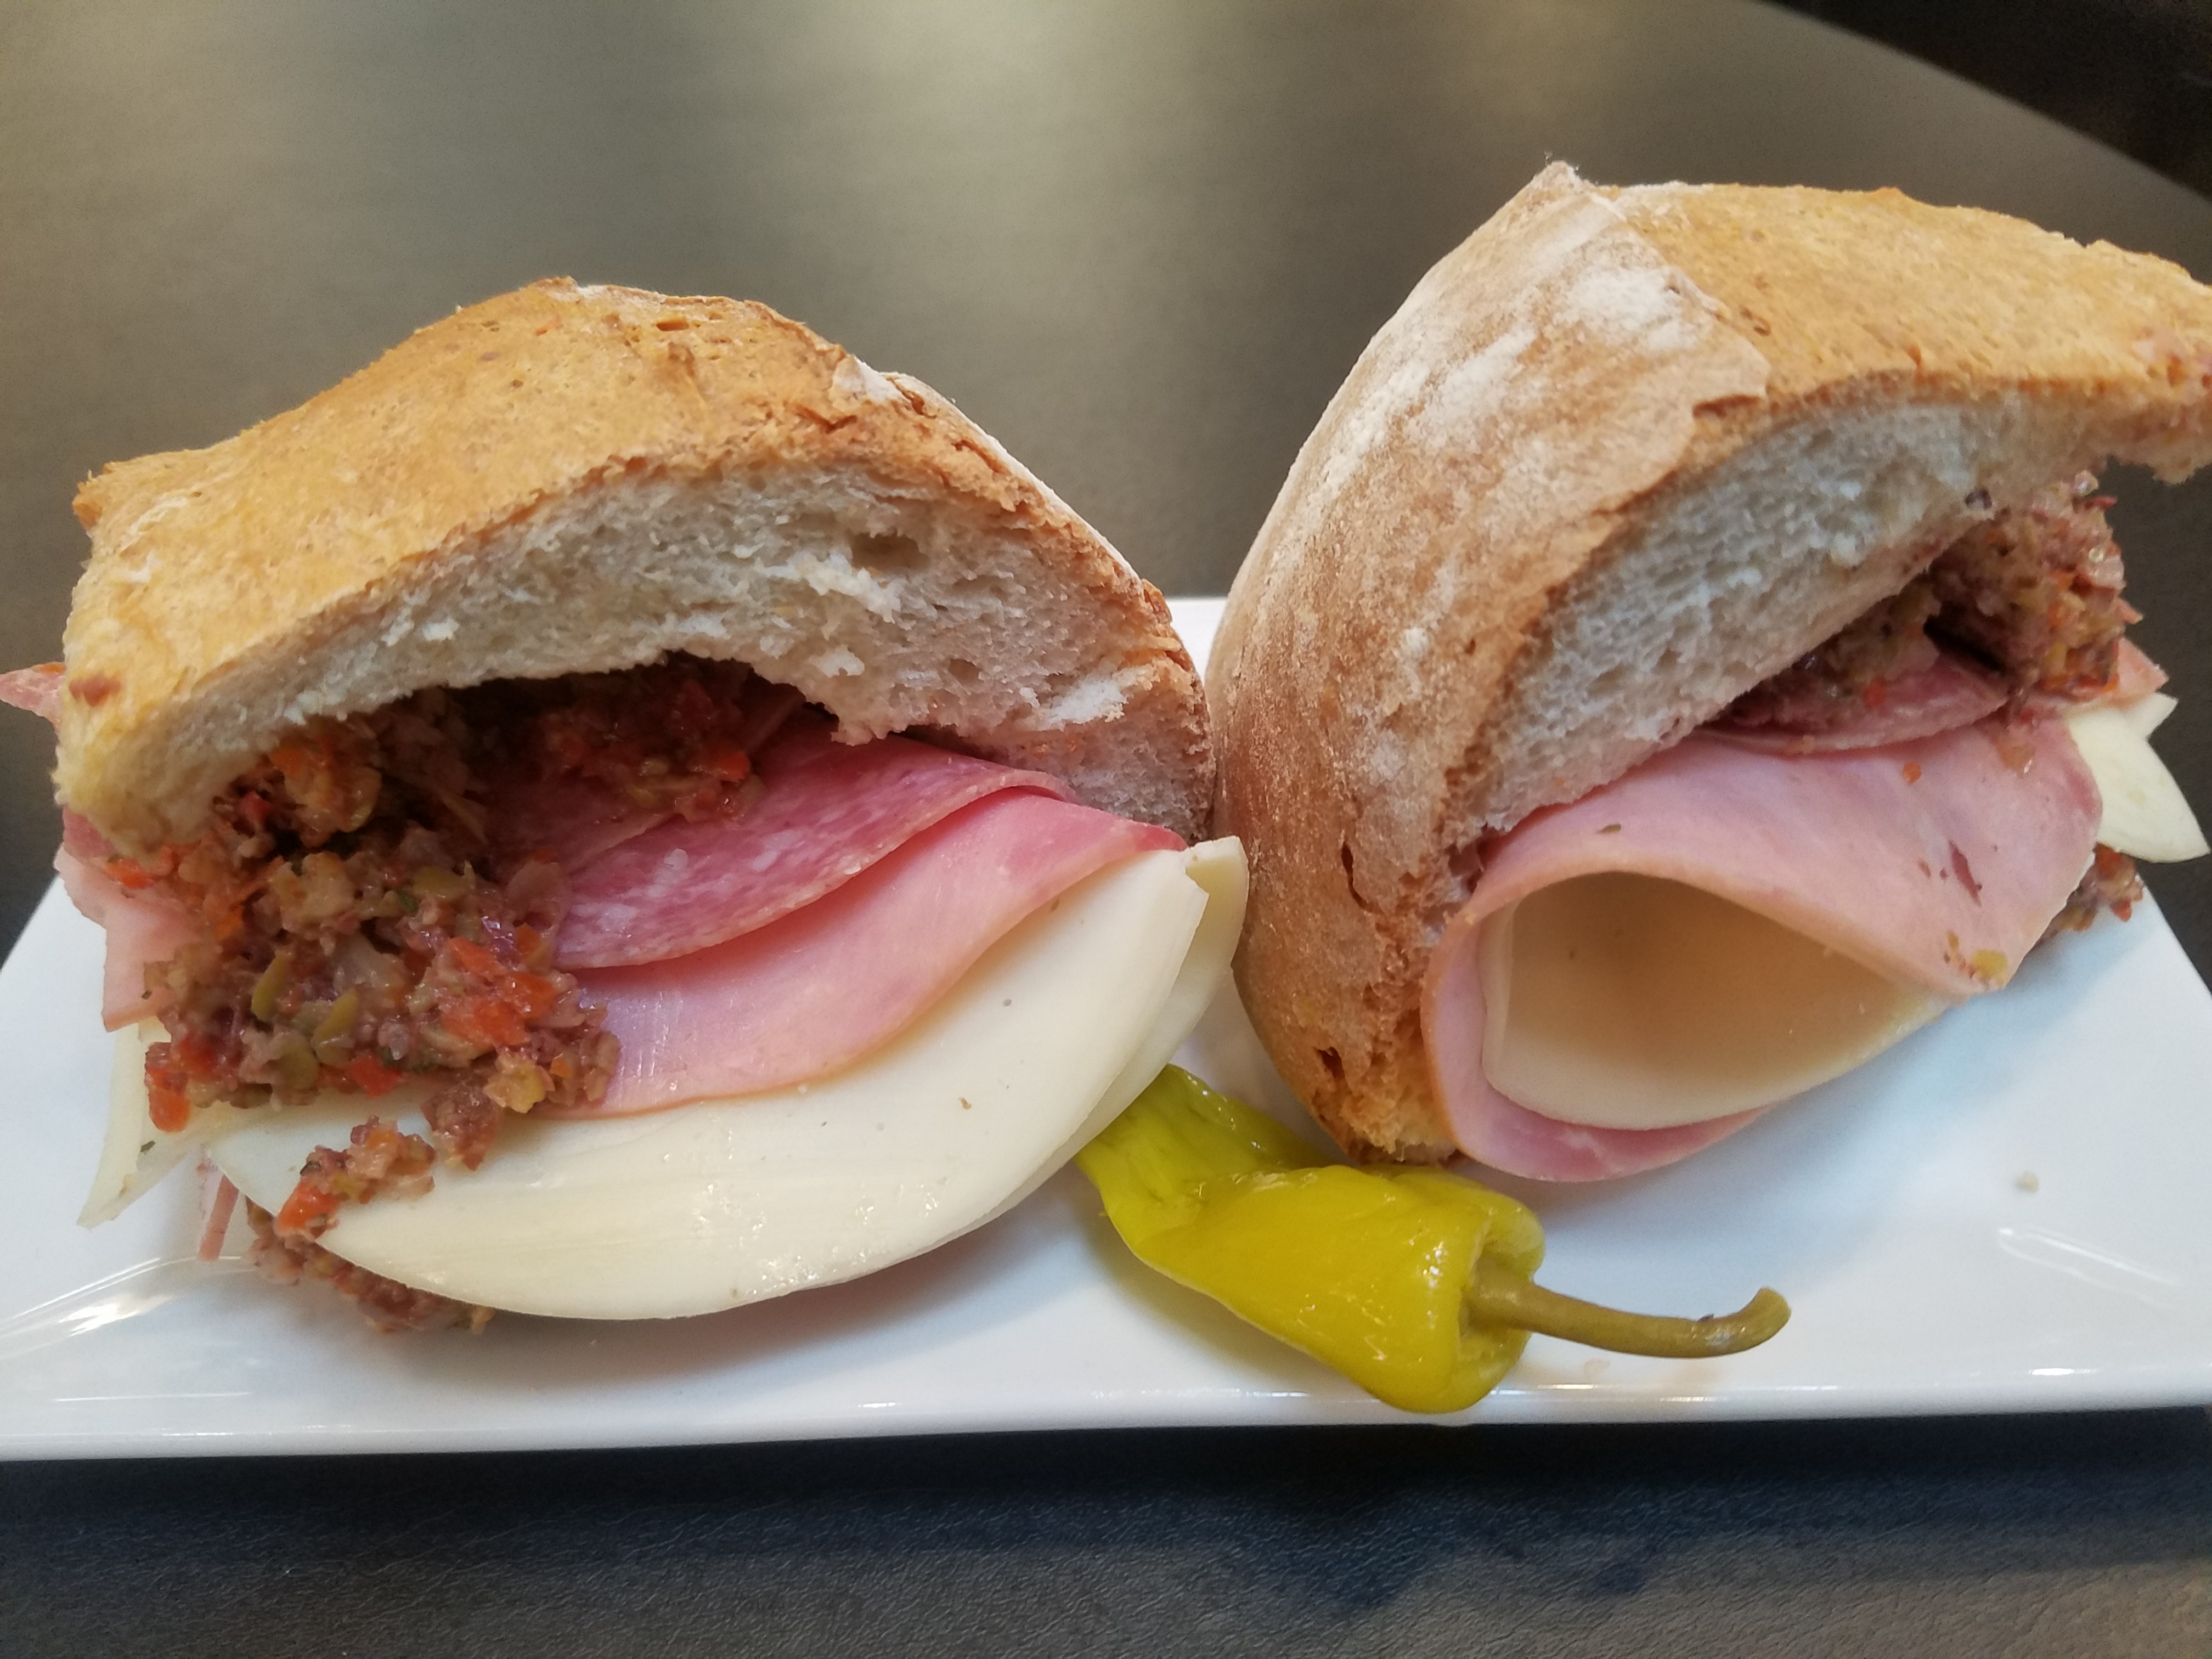 Learn more about the muffuletta!